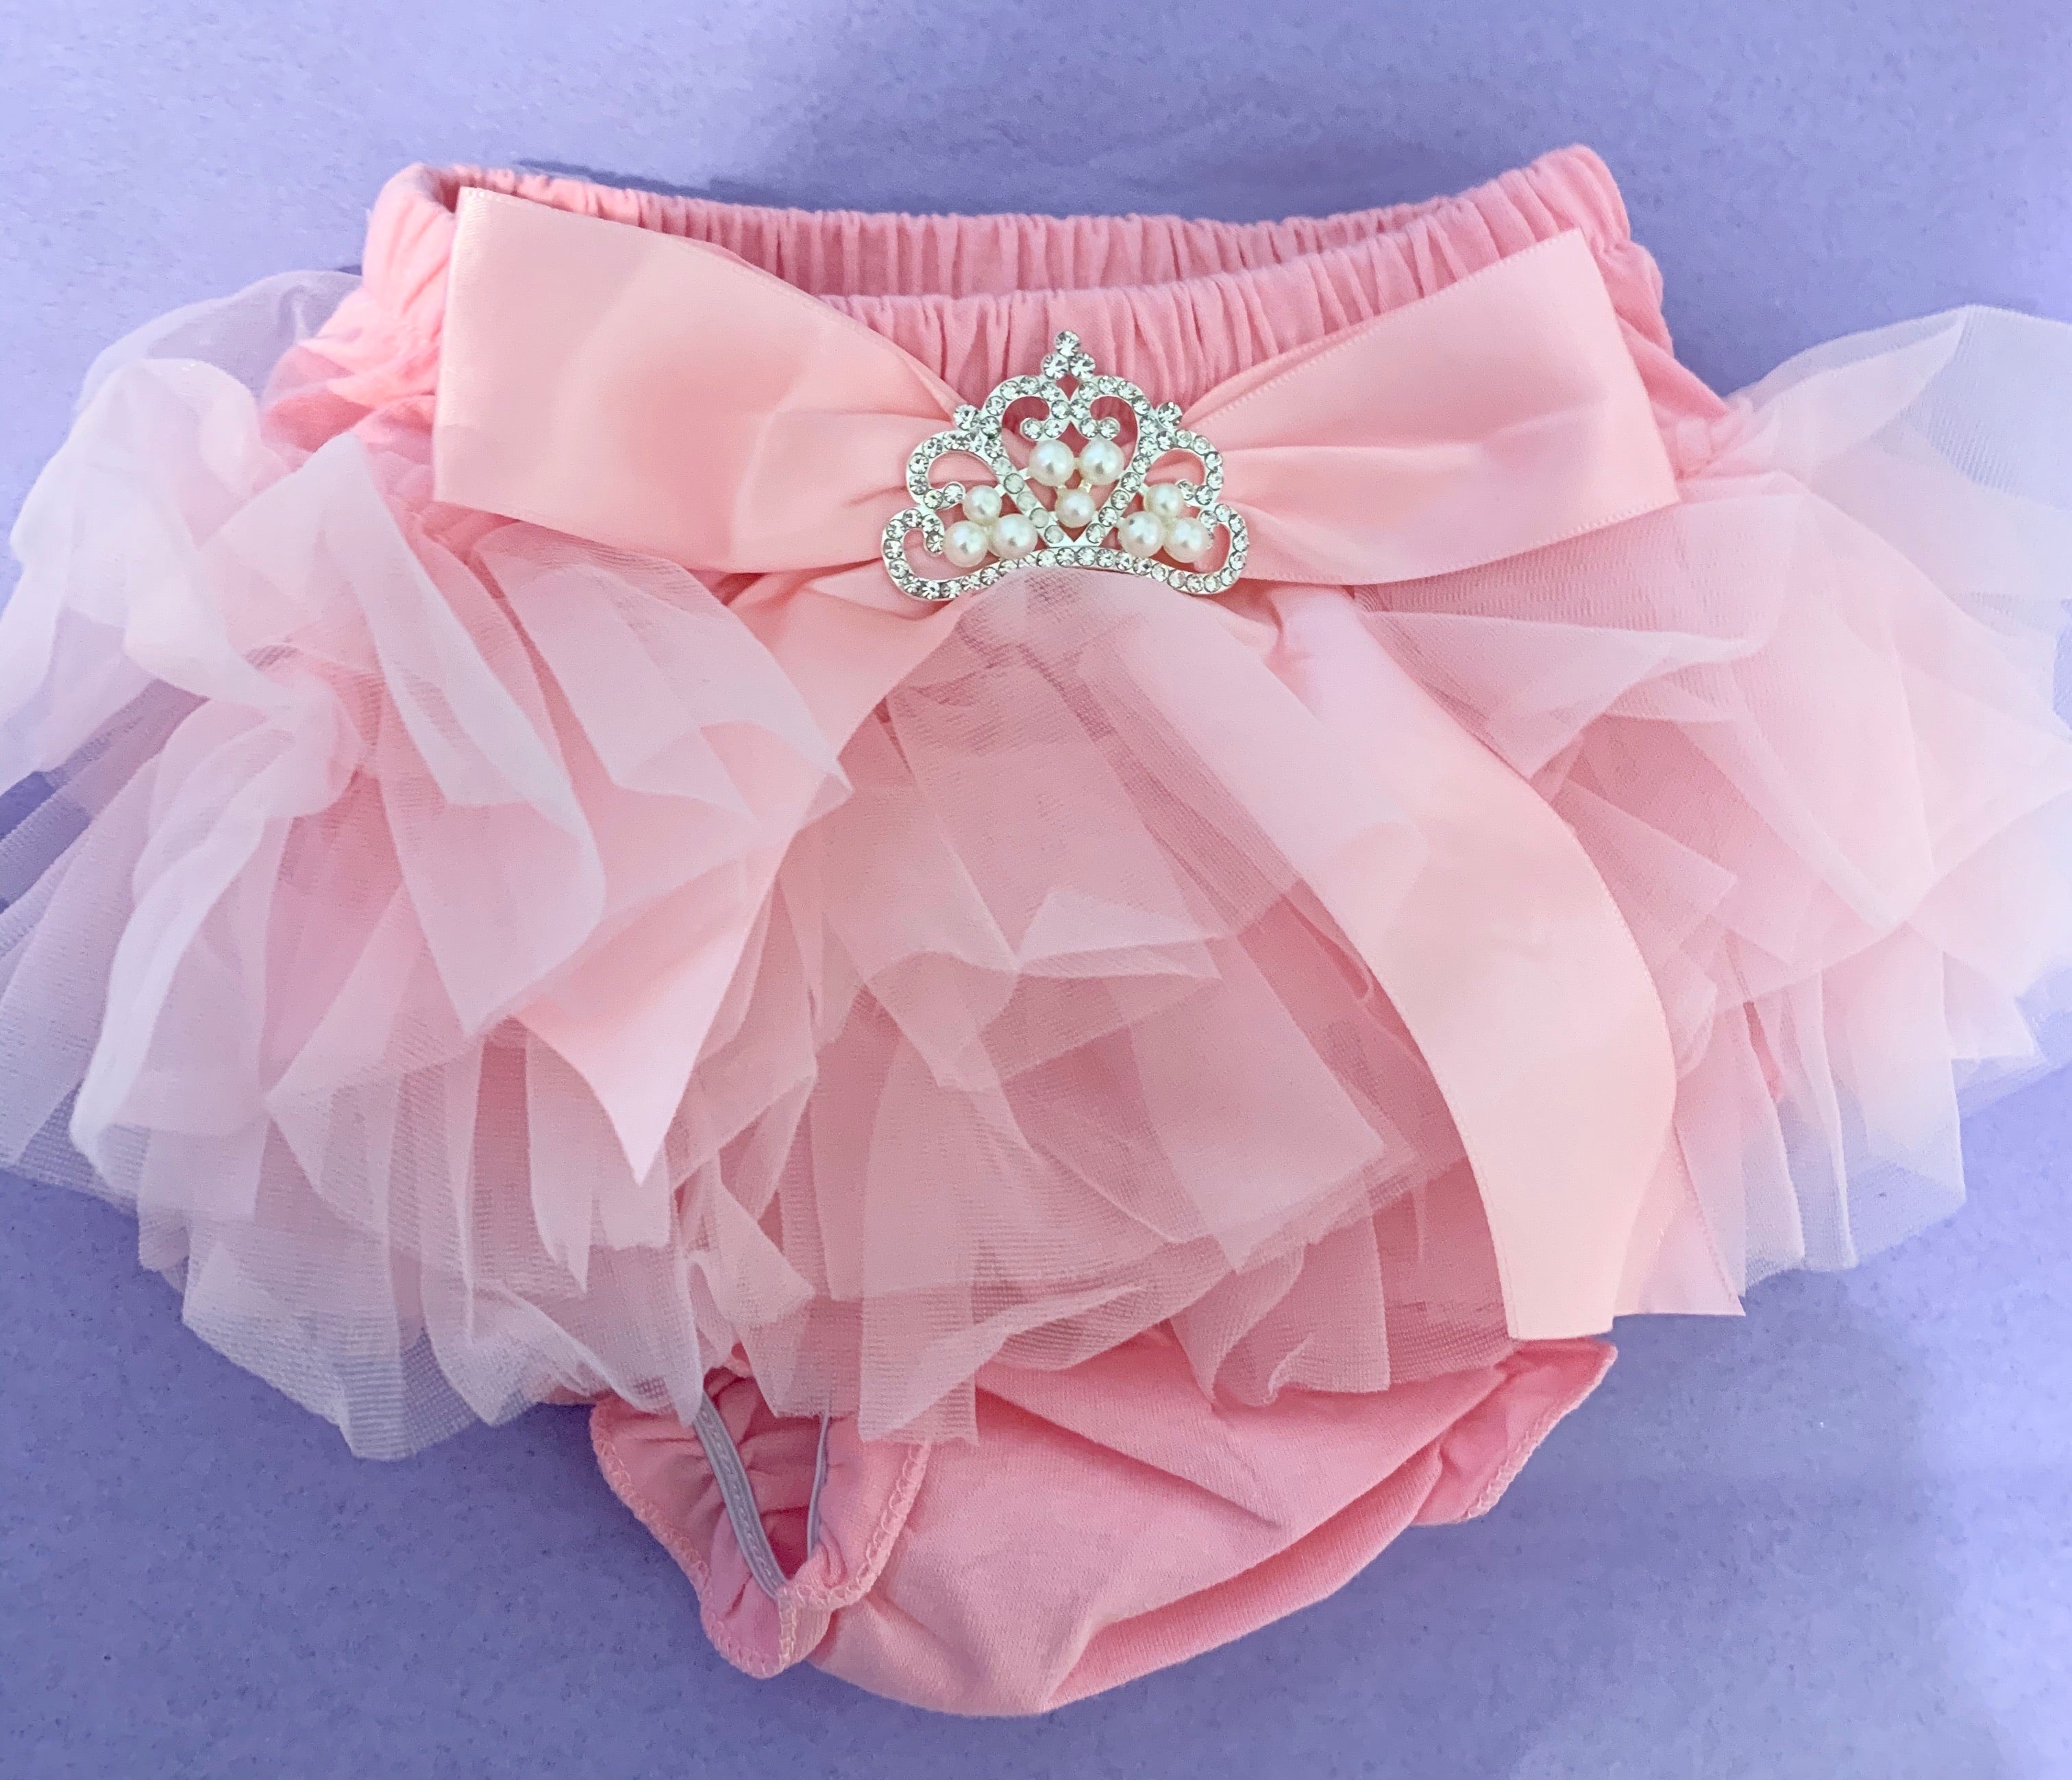 Bloomers with princess crown